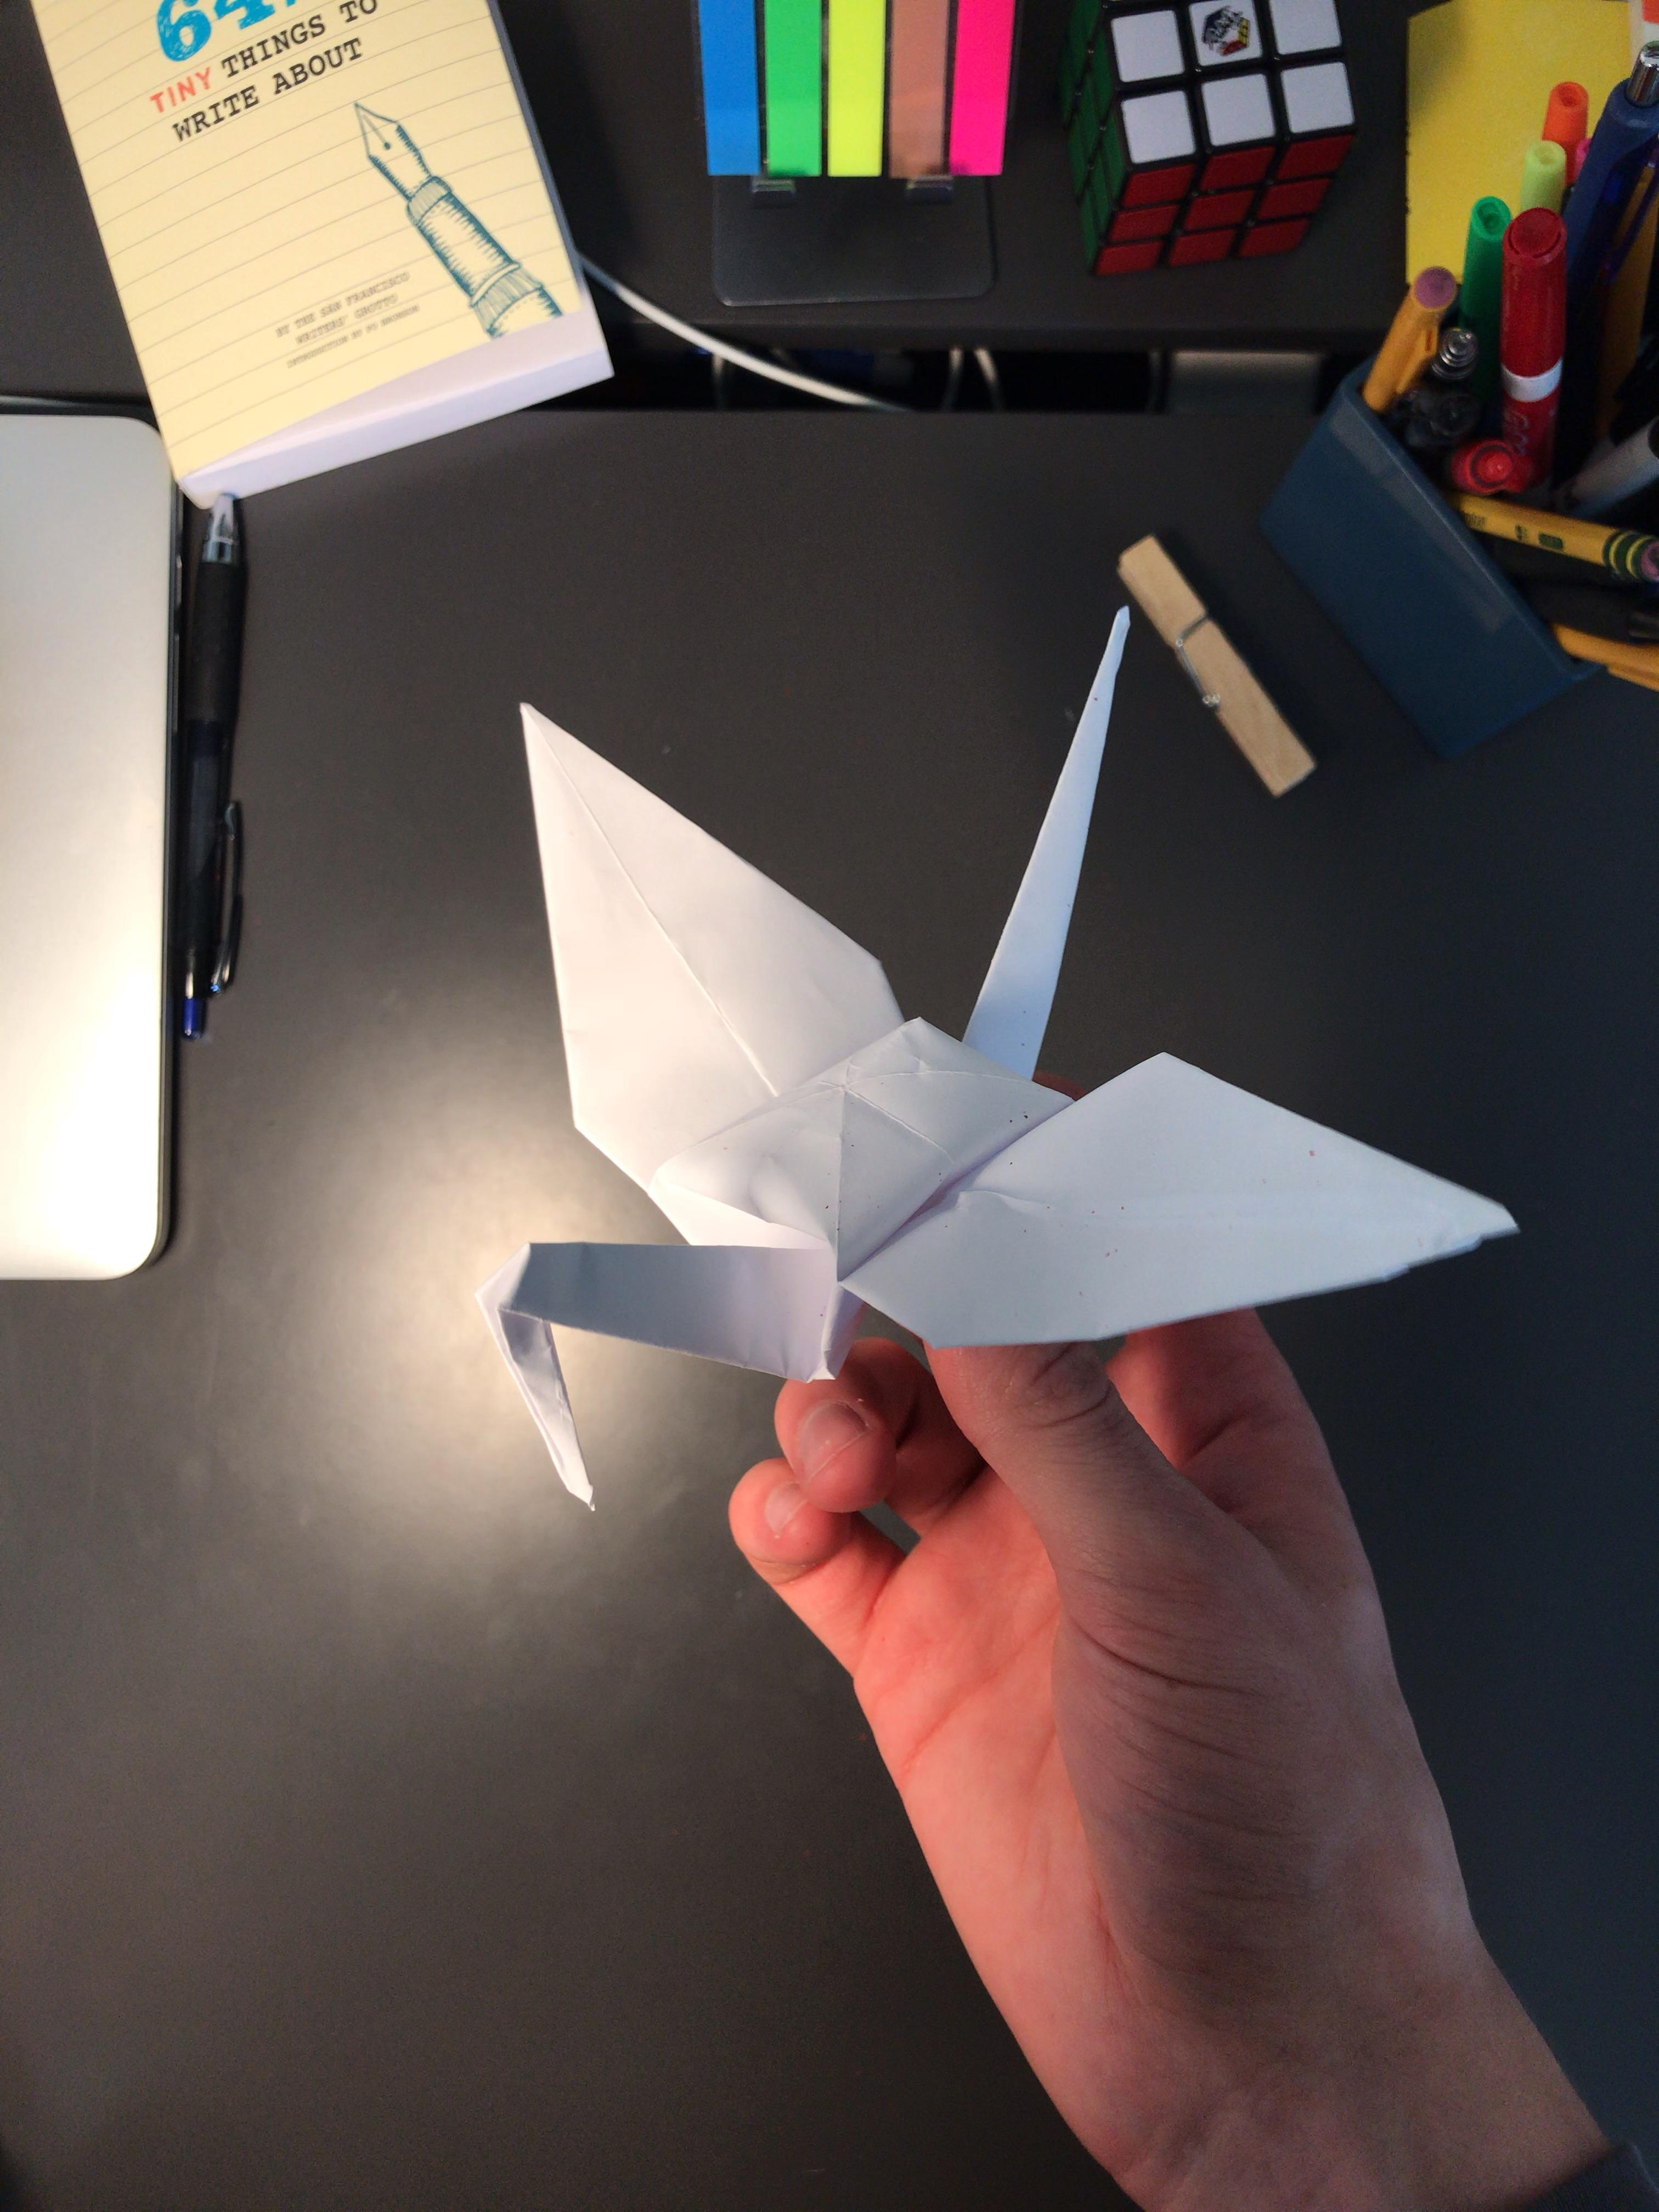 Printer Paper Origami How To Make An Origami Swan Out Of Printer Paper Step 27